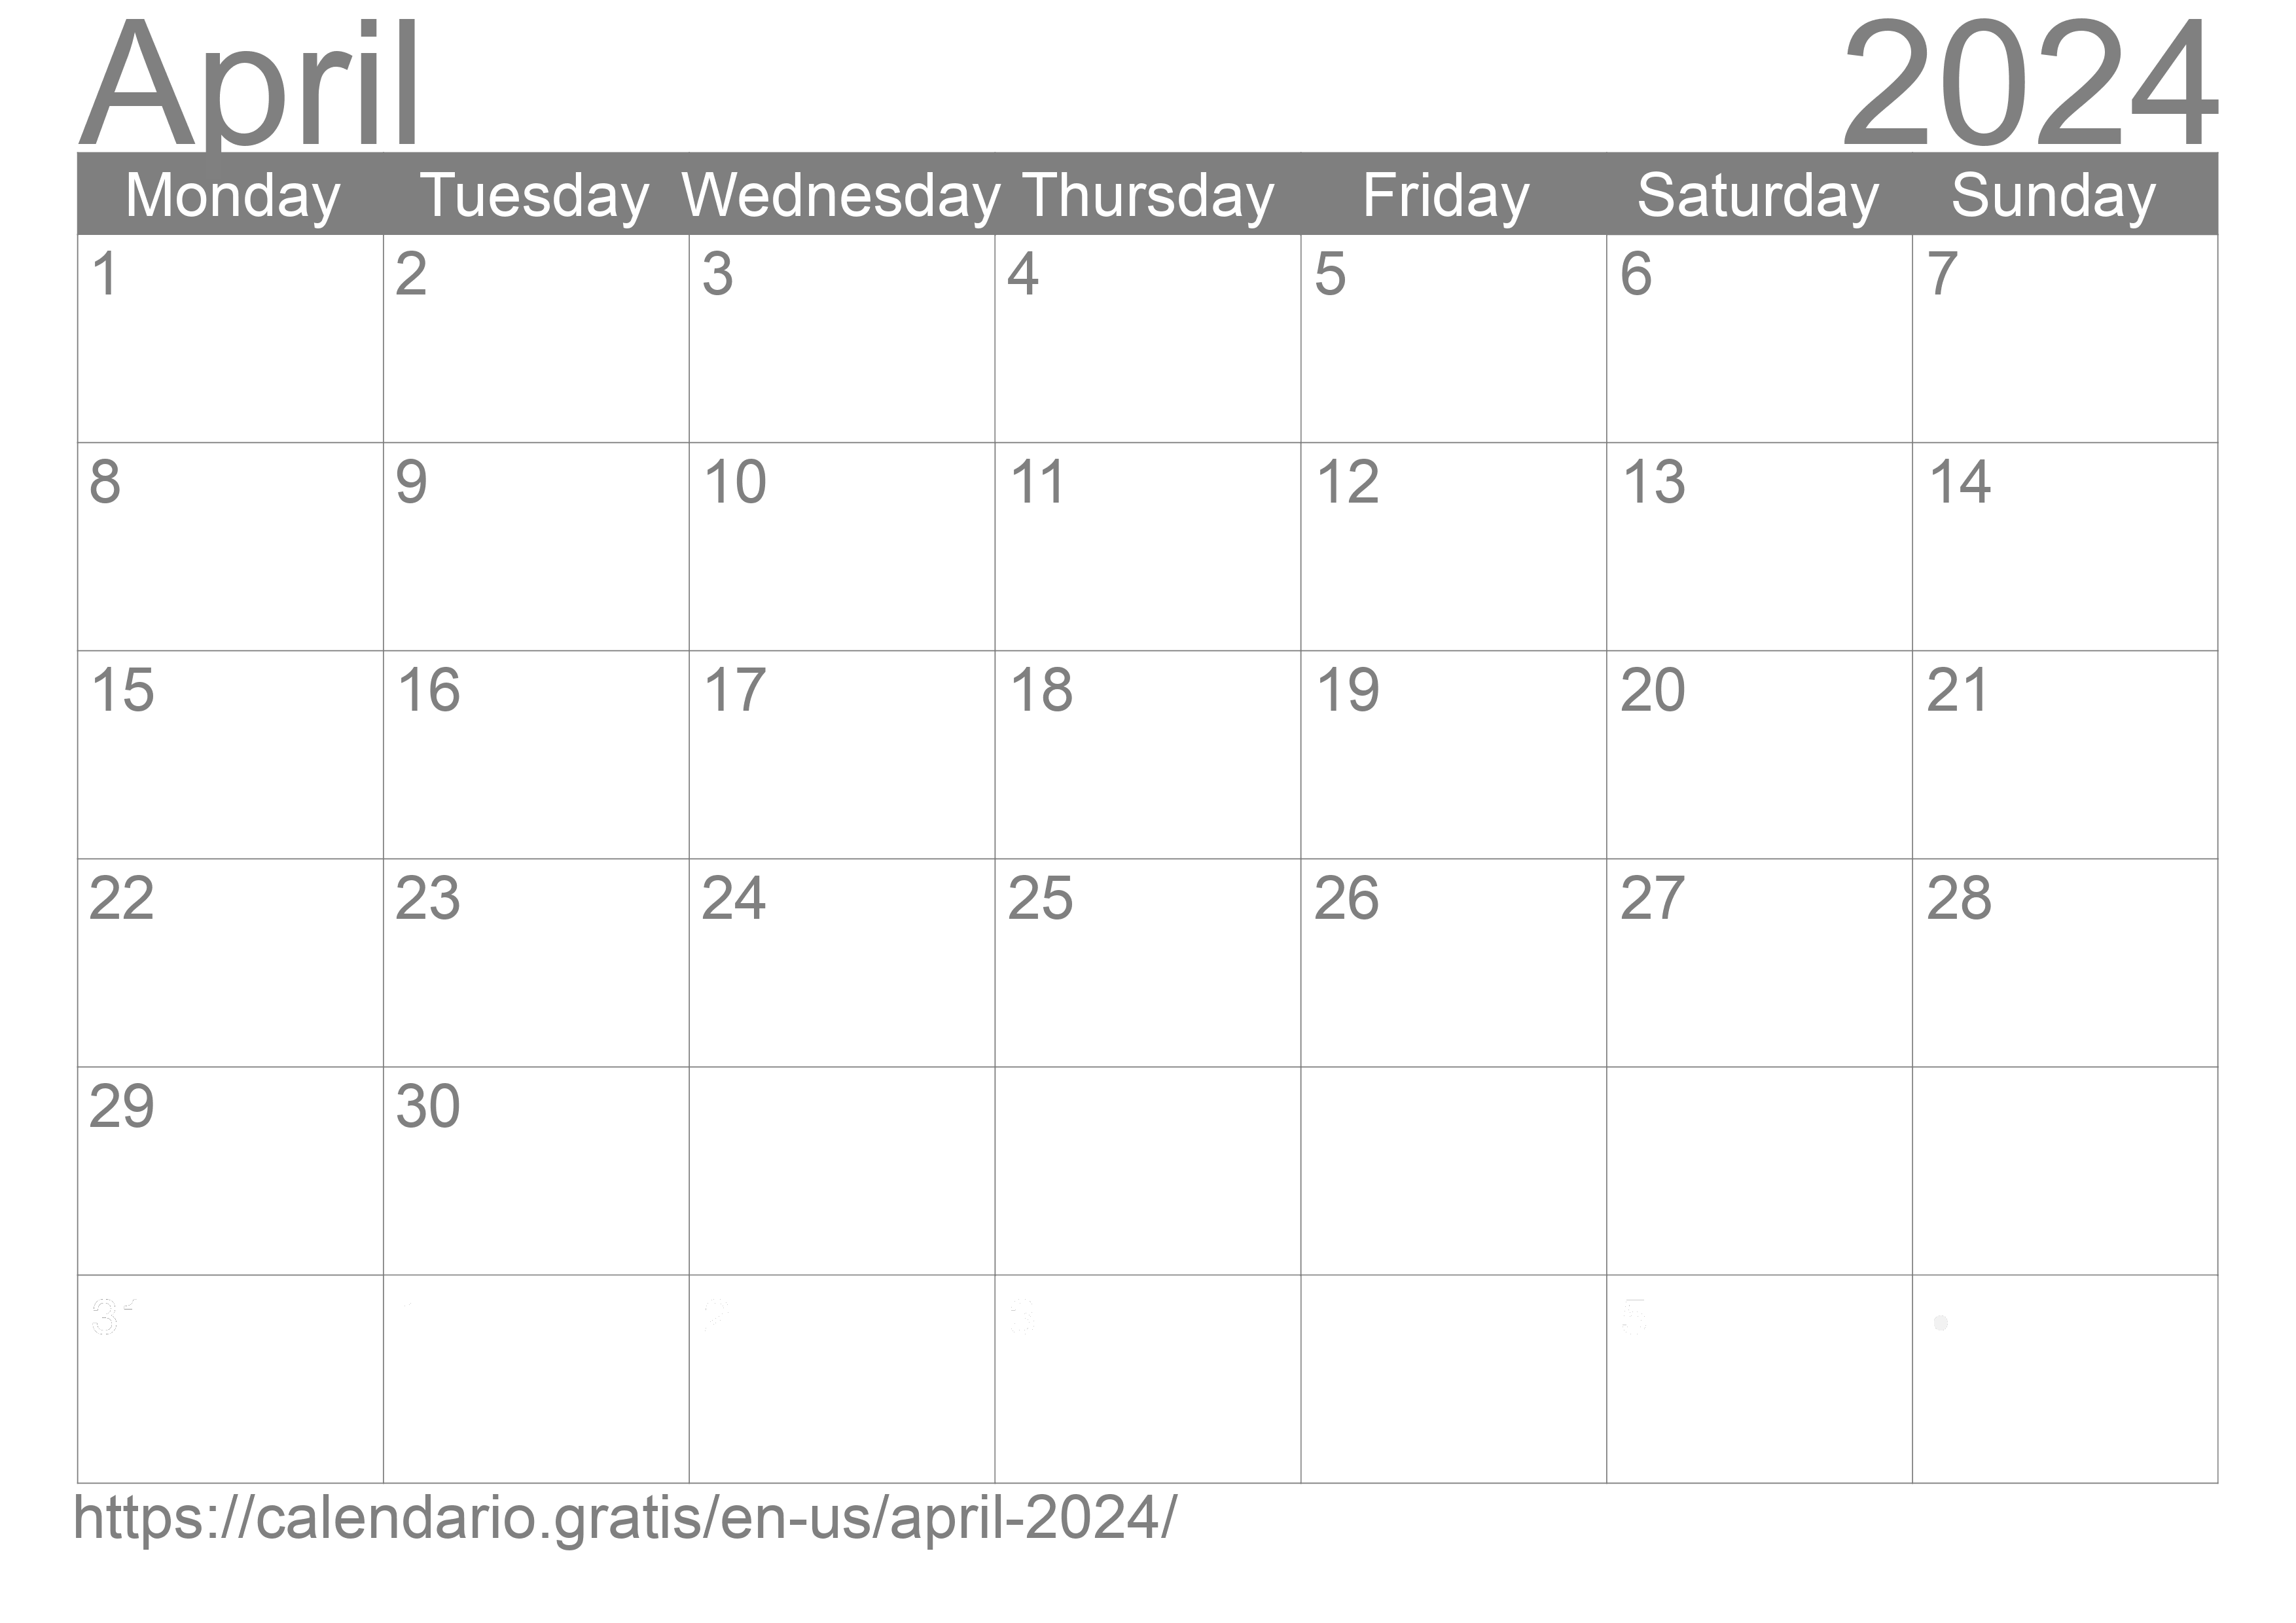 calendar-april-2024-from-united-states-of-america-in-english